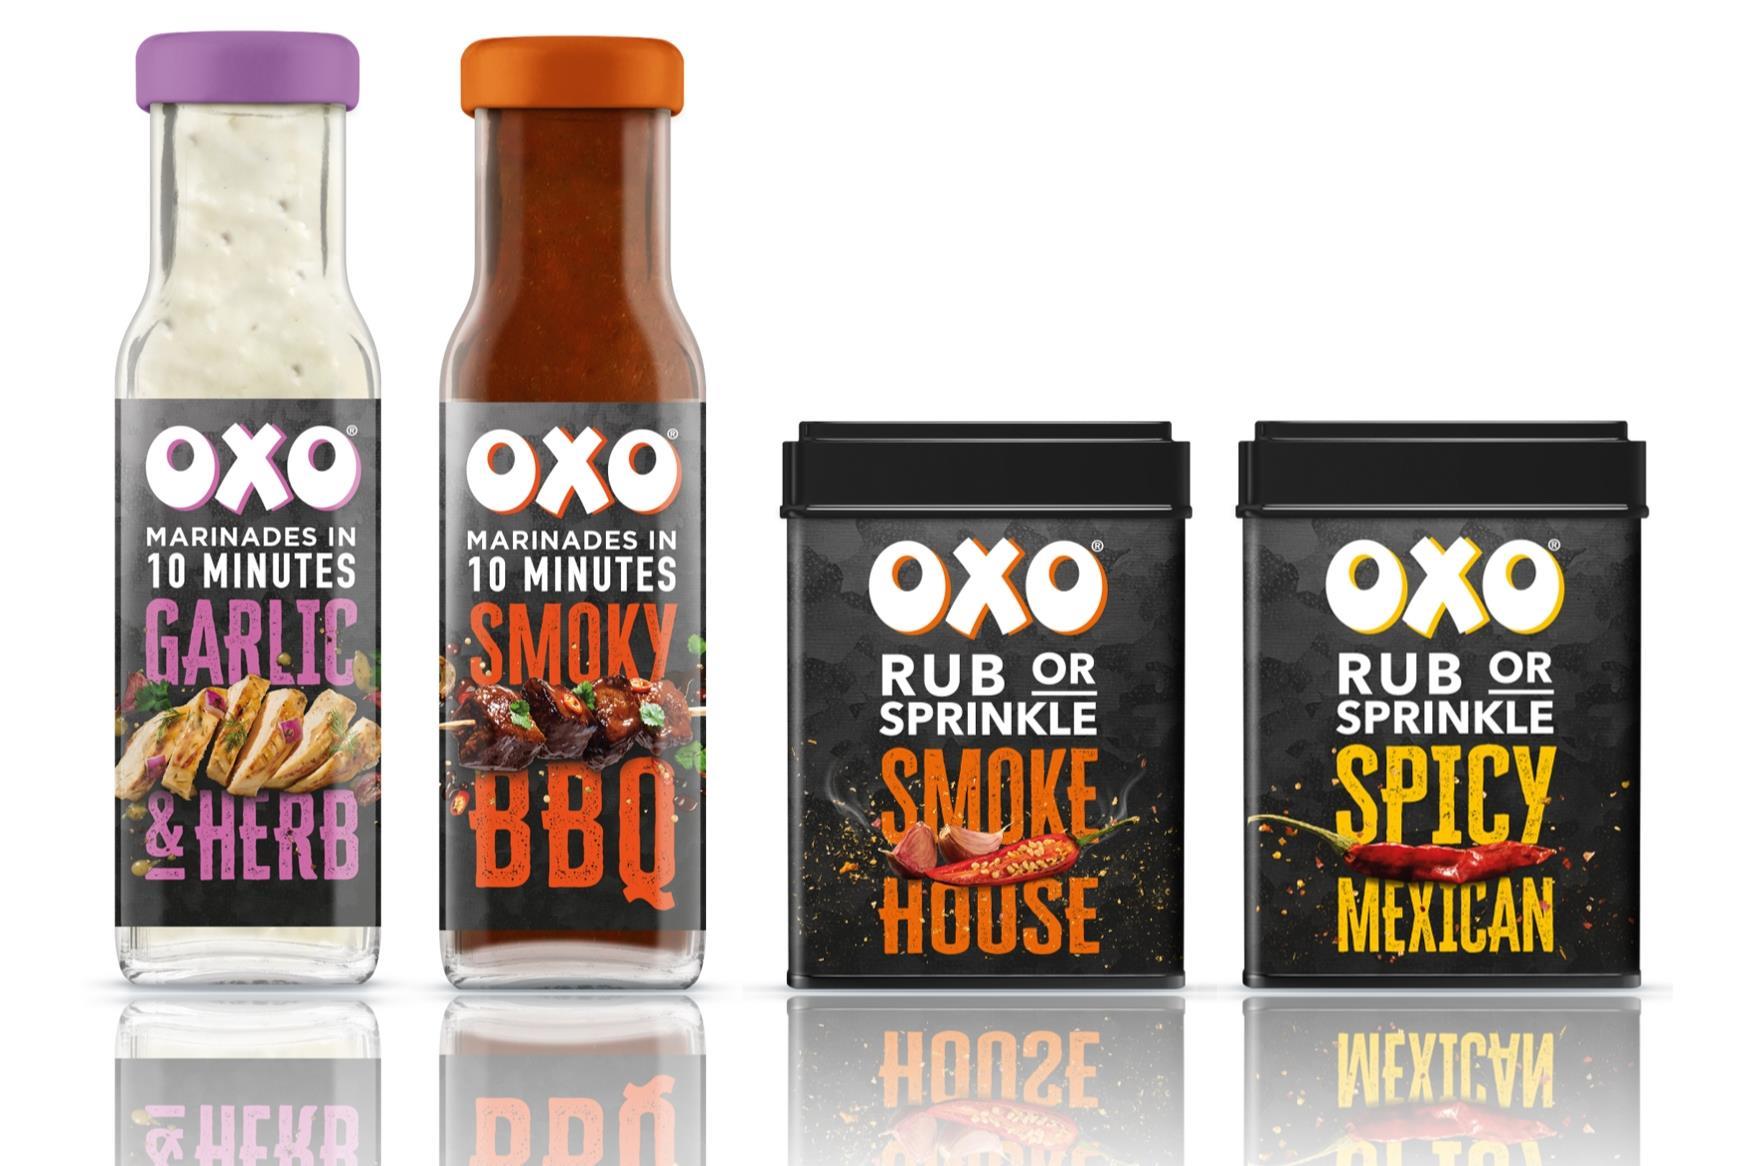 Oxo taps boom with move into rubs and marinades News | The Grocer